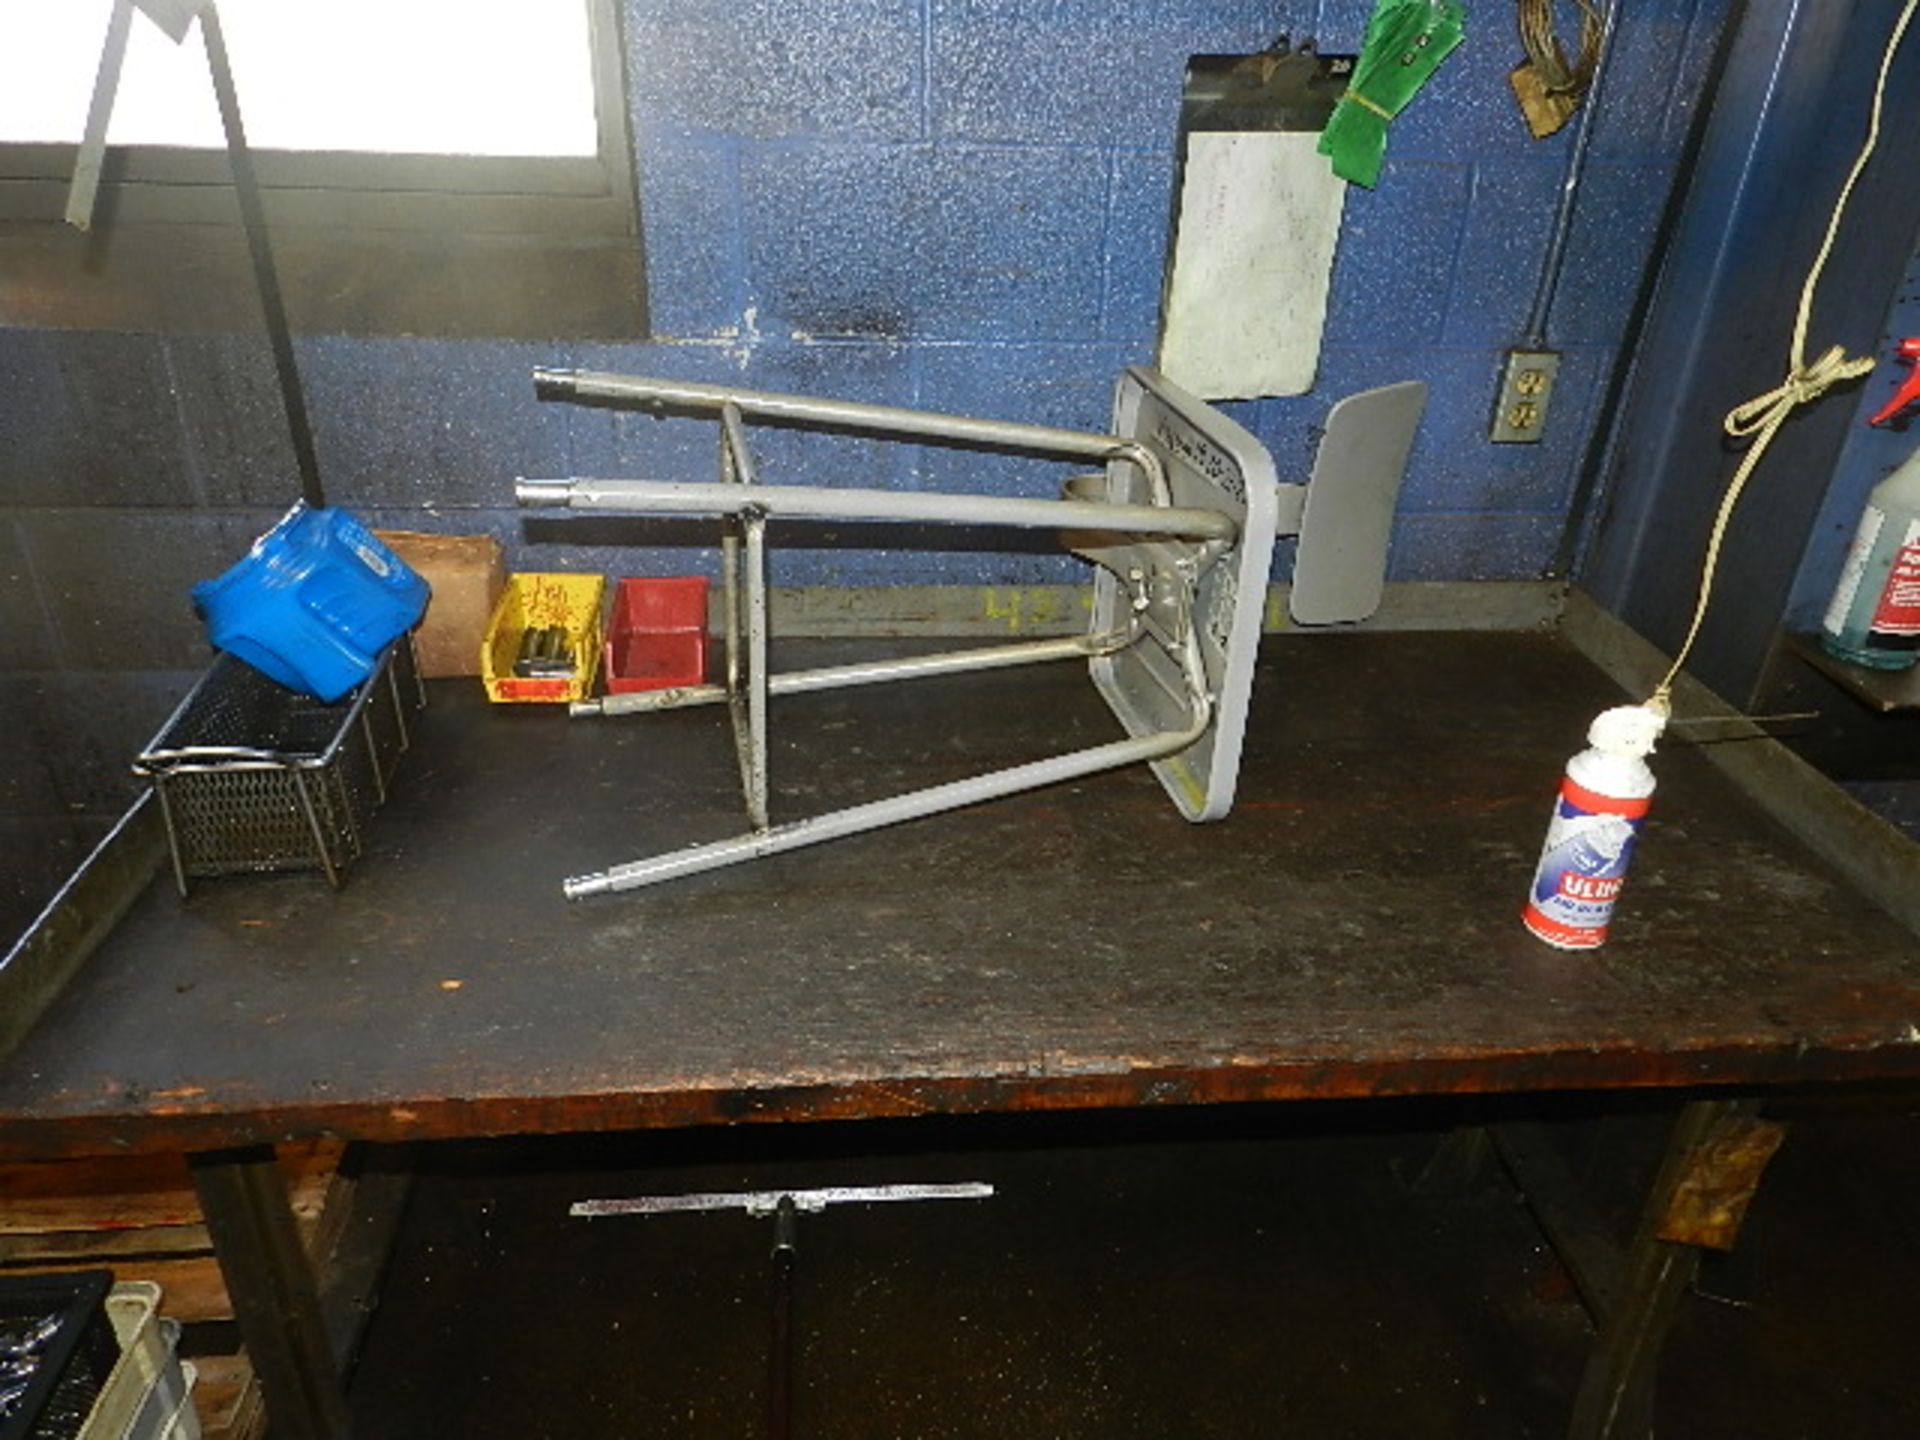 (1) 6' LONG WORK BENCH, (1) 5' LONG WORK BENCH, STOOL, AND CONTENTS ON TABLE (A) - Image 4 of 4